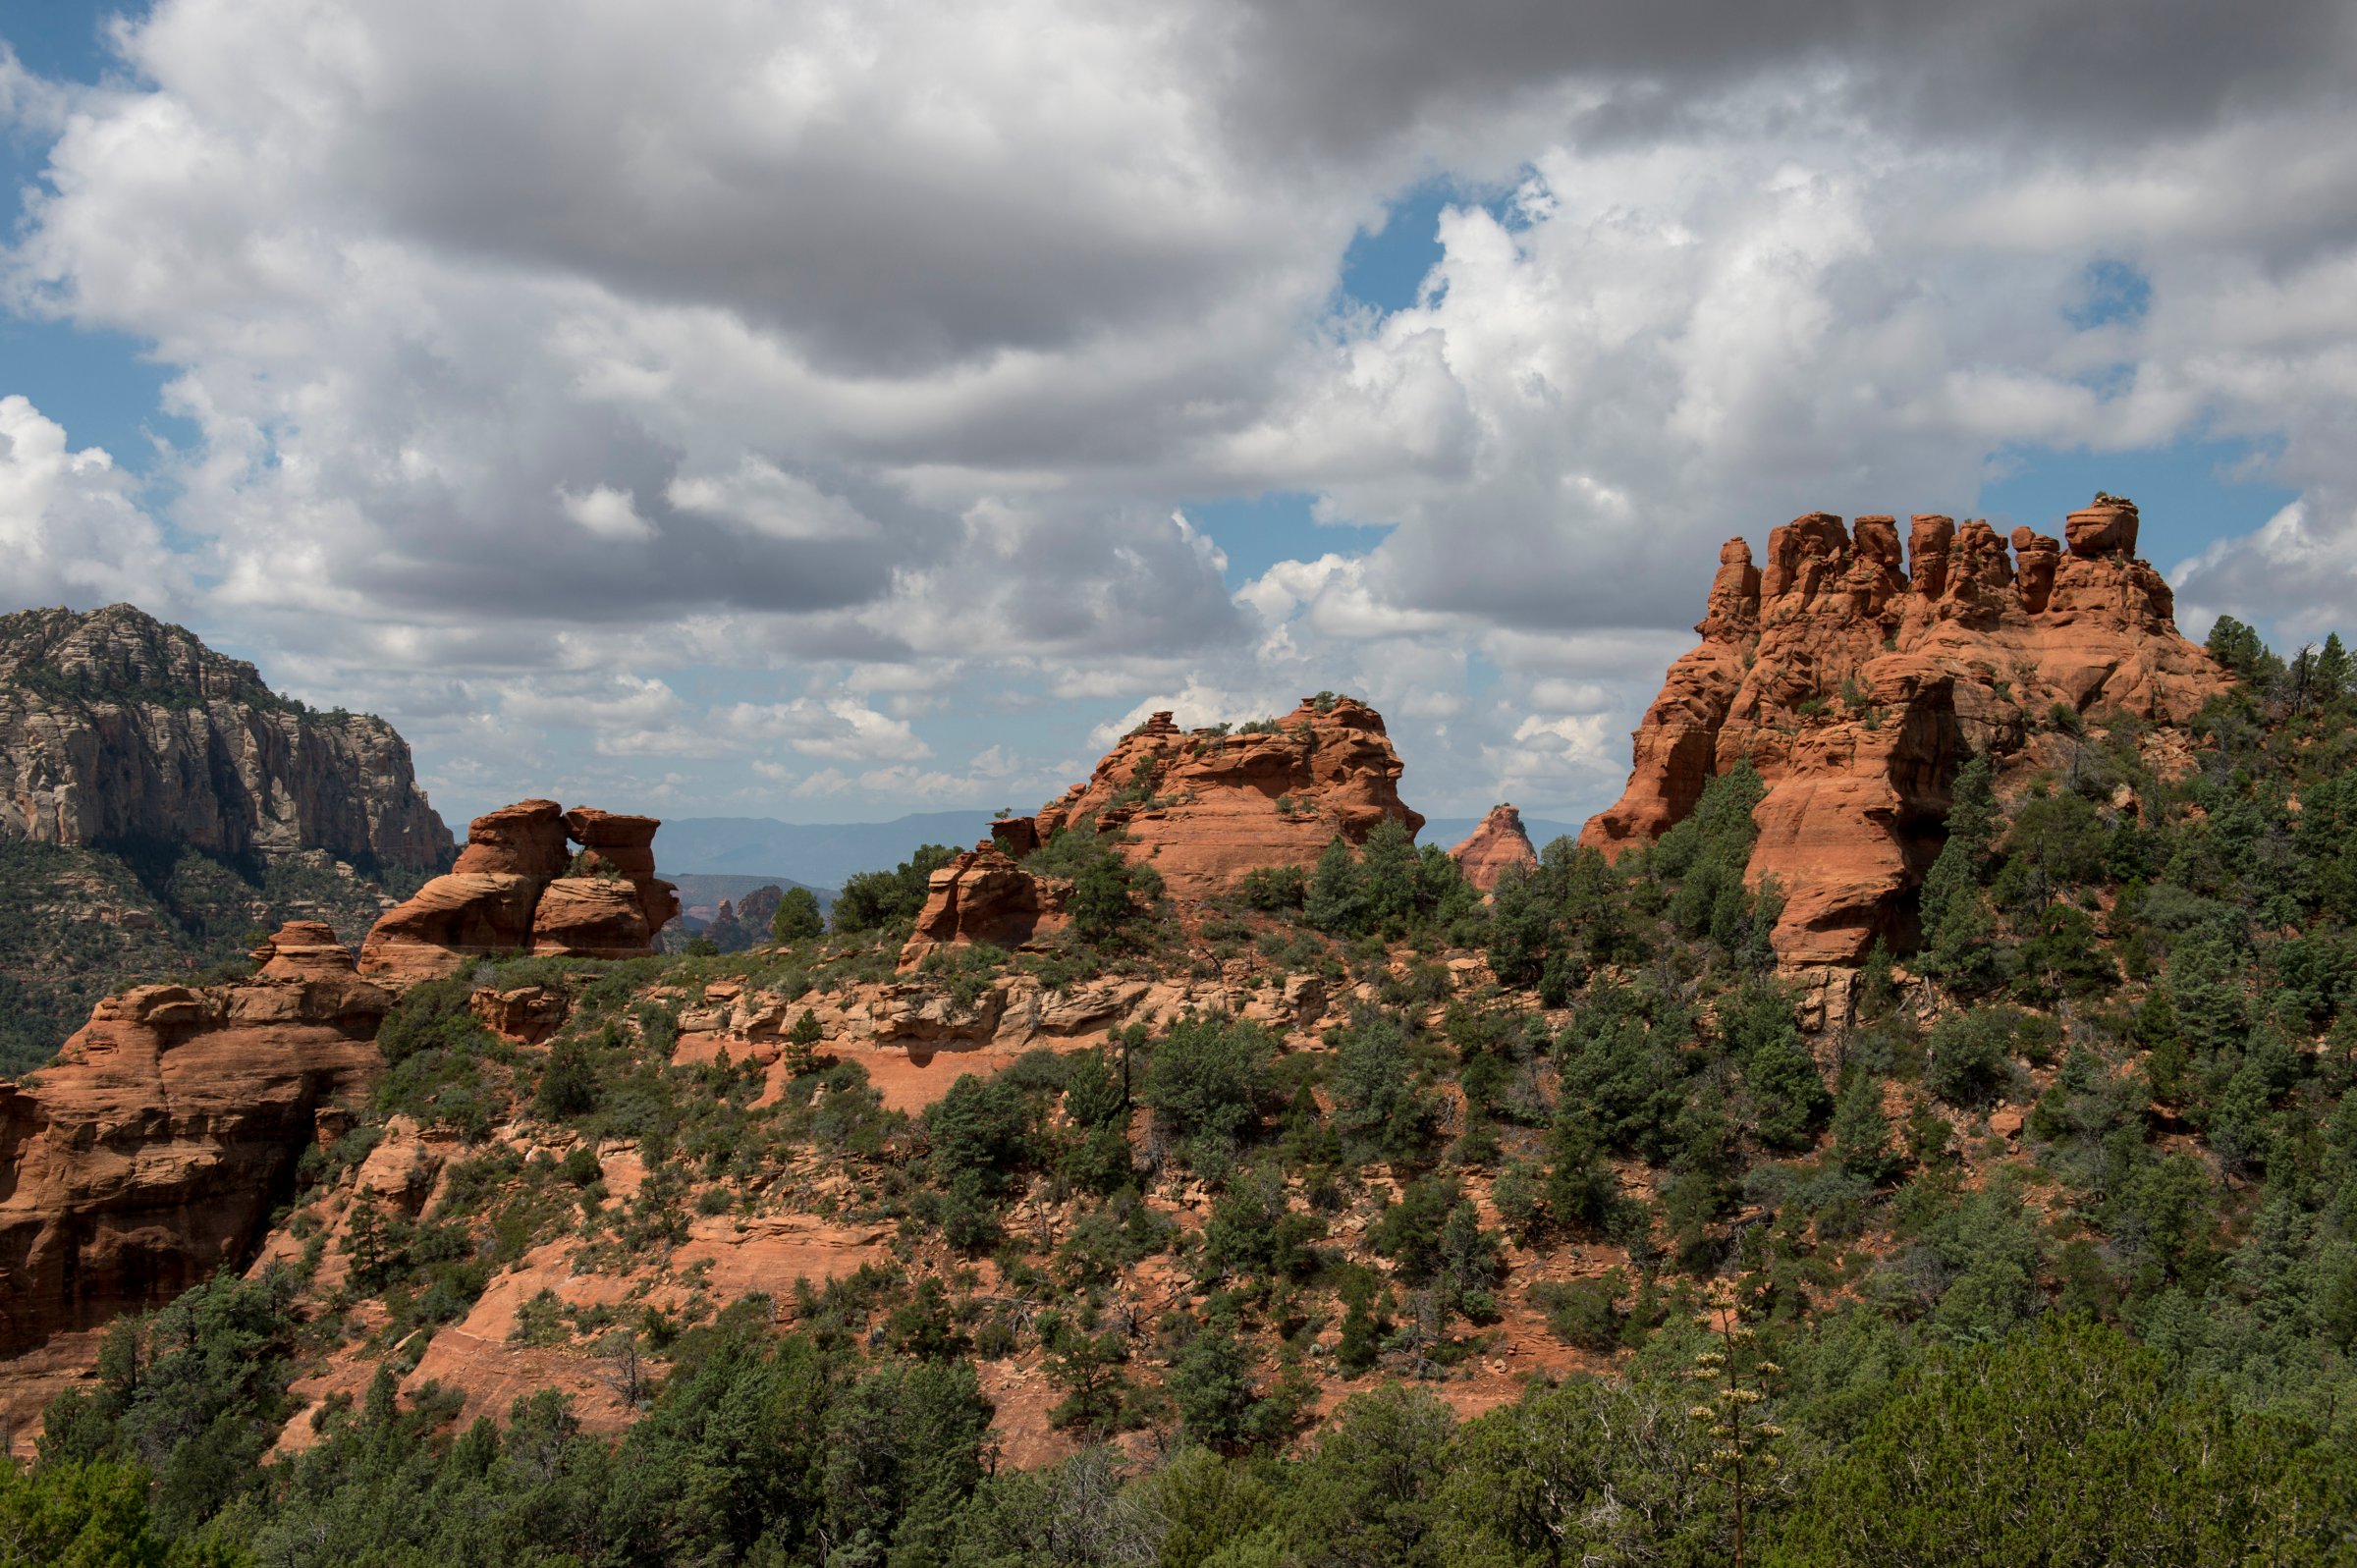 View of the red rock formations from Schnebly Hill Road near Sedona, Arizona, USA.